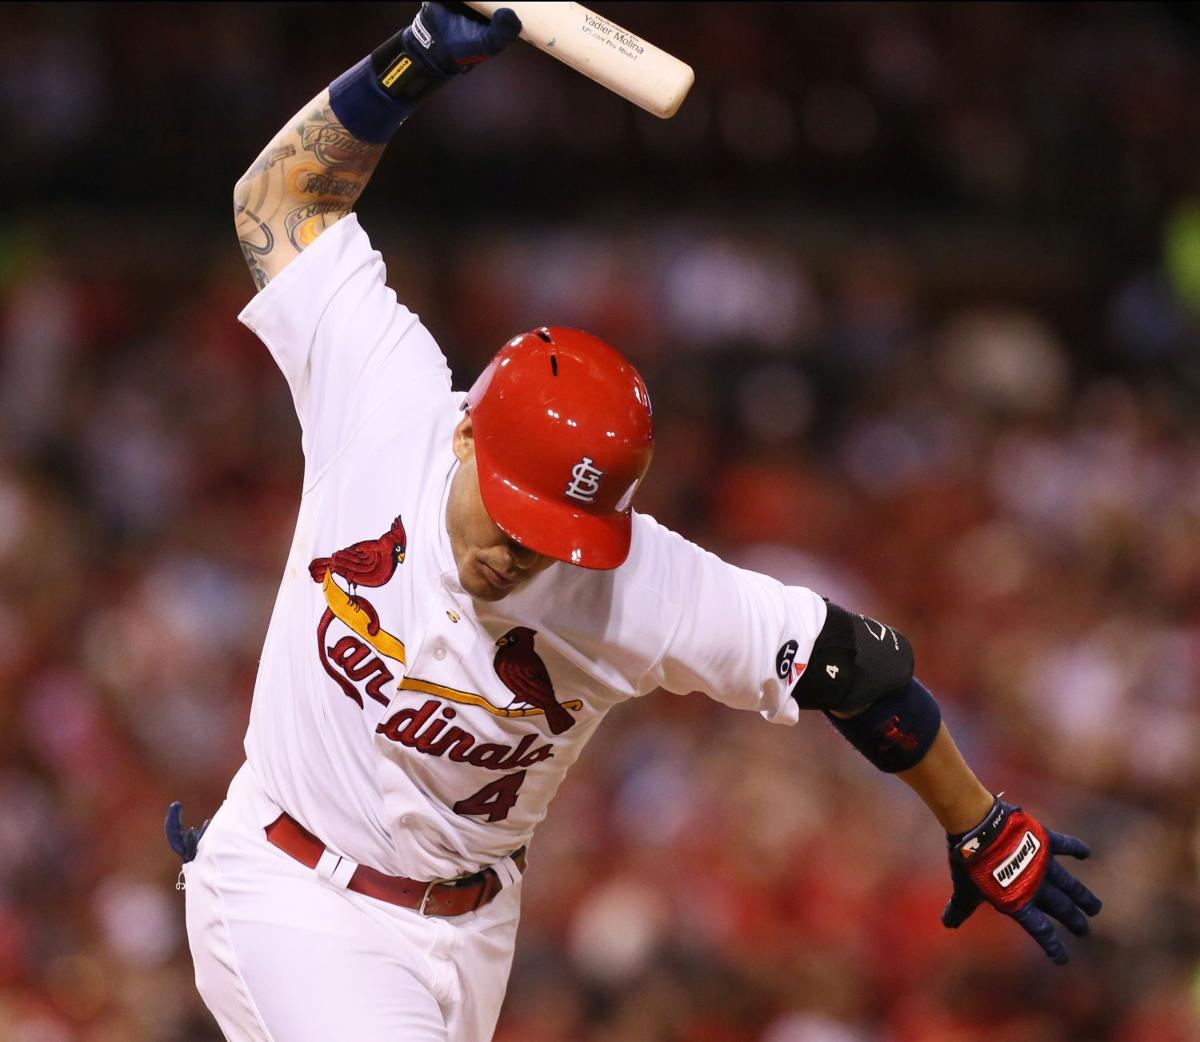 Cards notebook: .300 hitters becoming scarce in majors